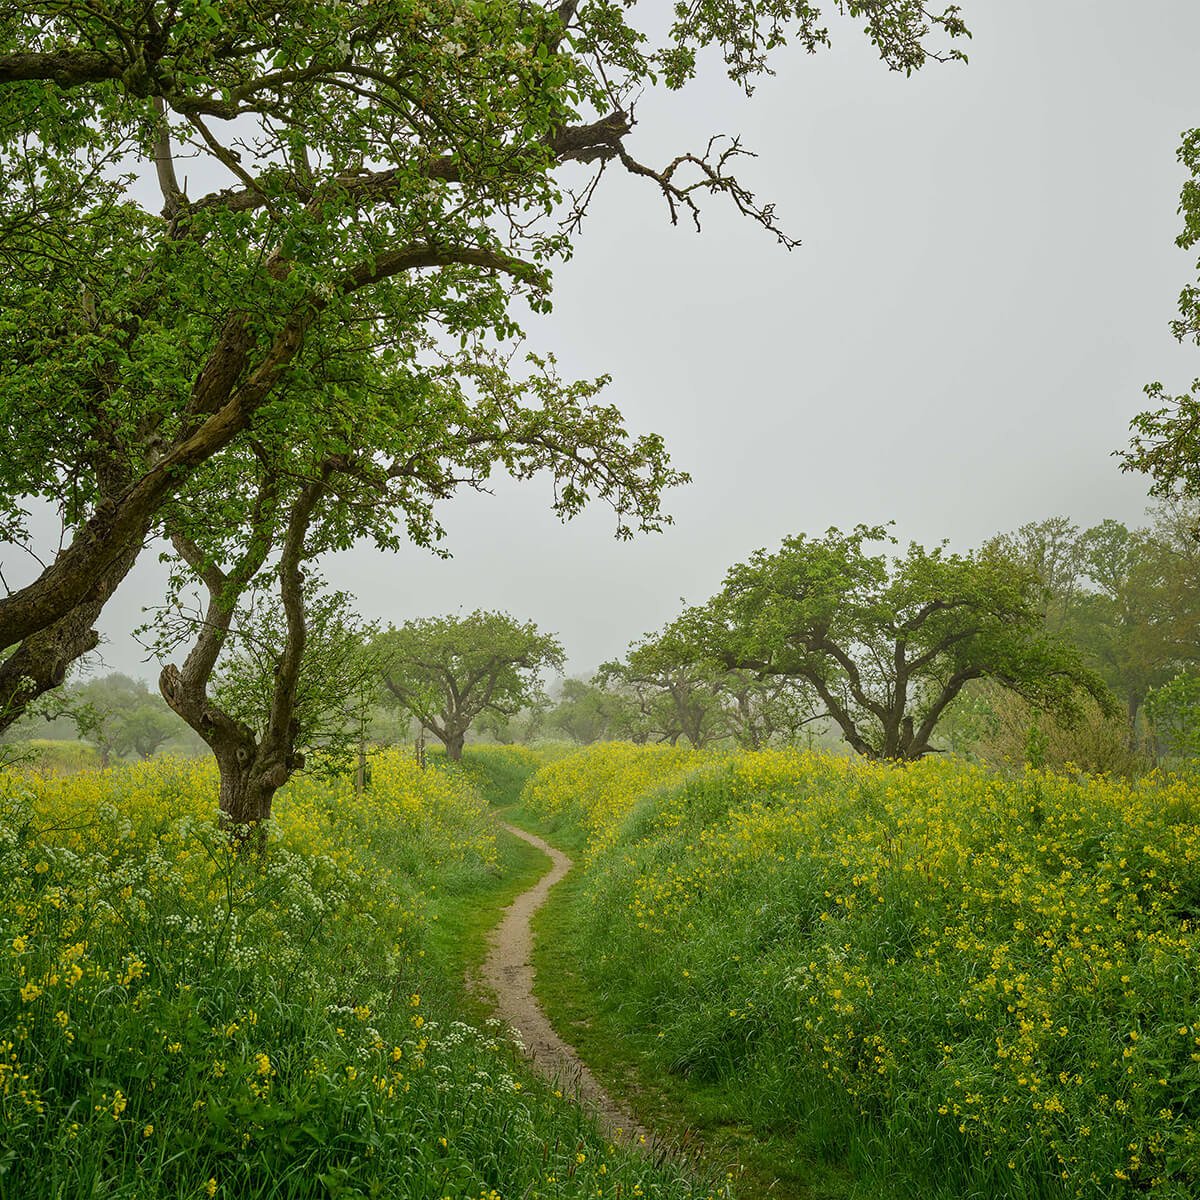 Path through hills with yellow flowers